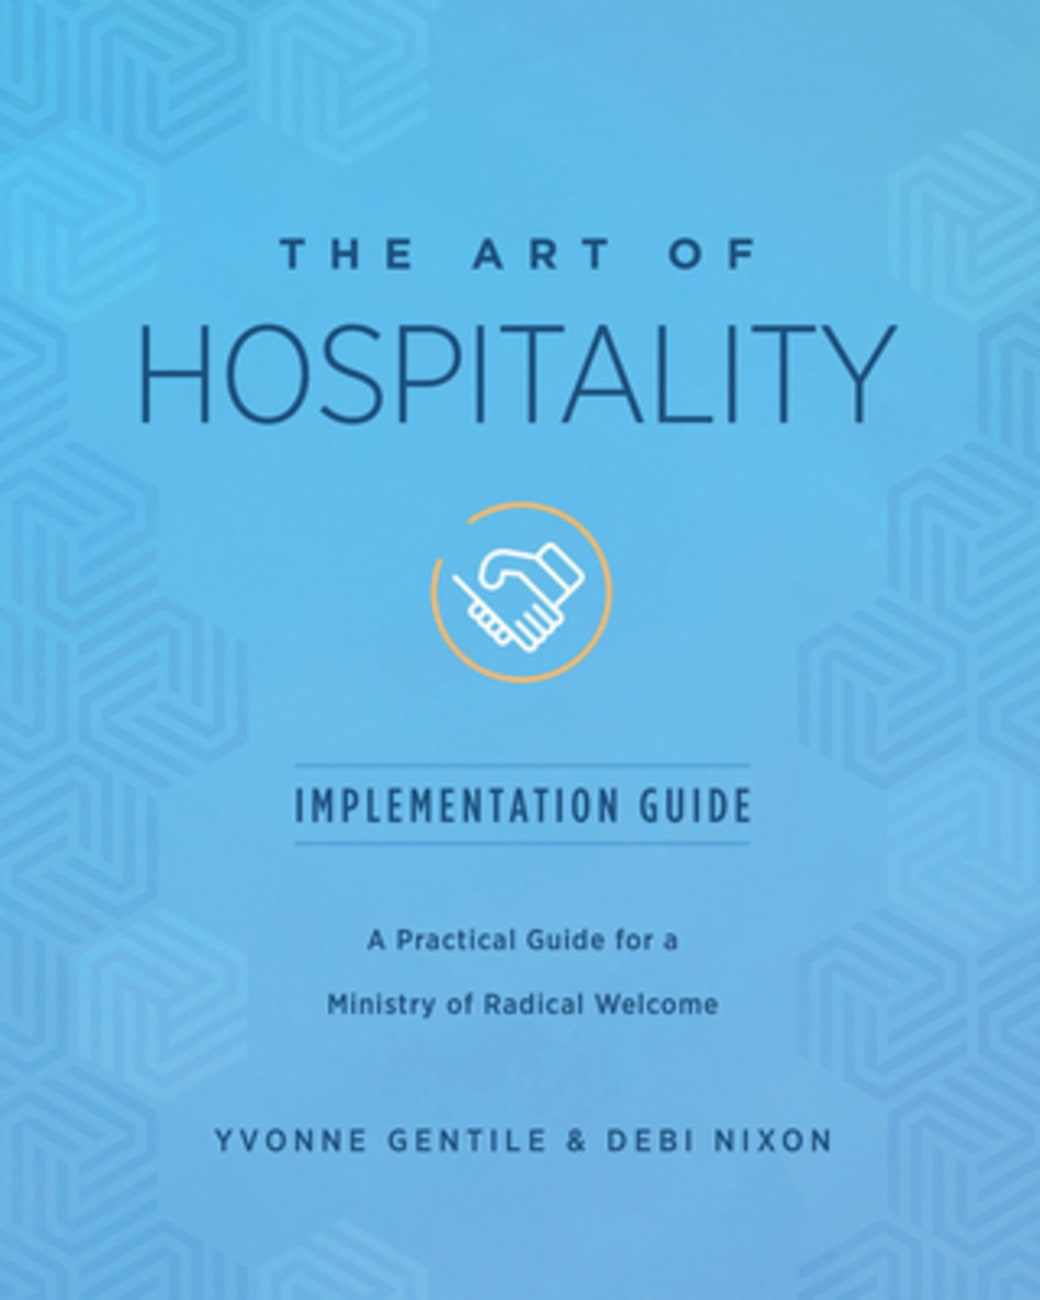 The Art of Hospitality: A Practical Guide For a Ministry of Radical Welcome (Implementation Guide) Paperback